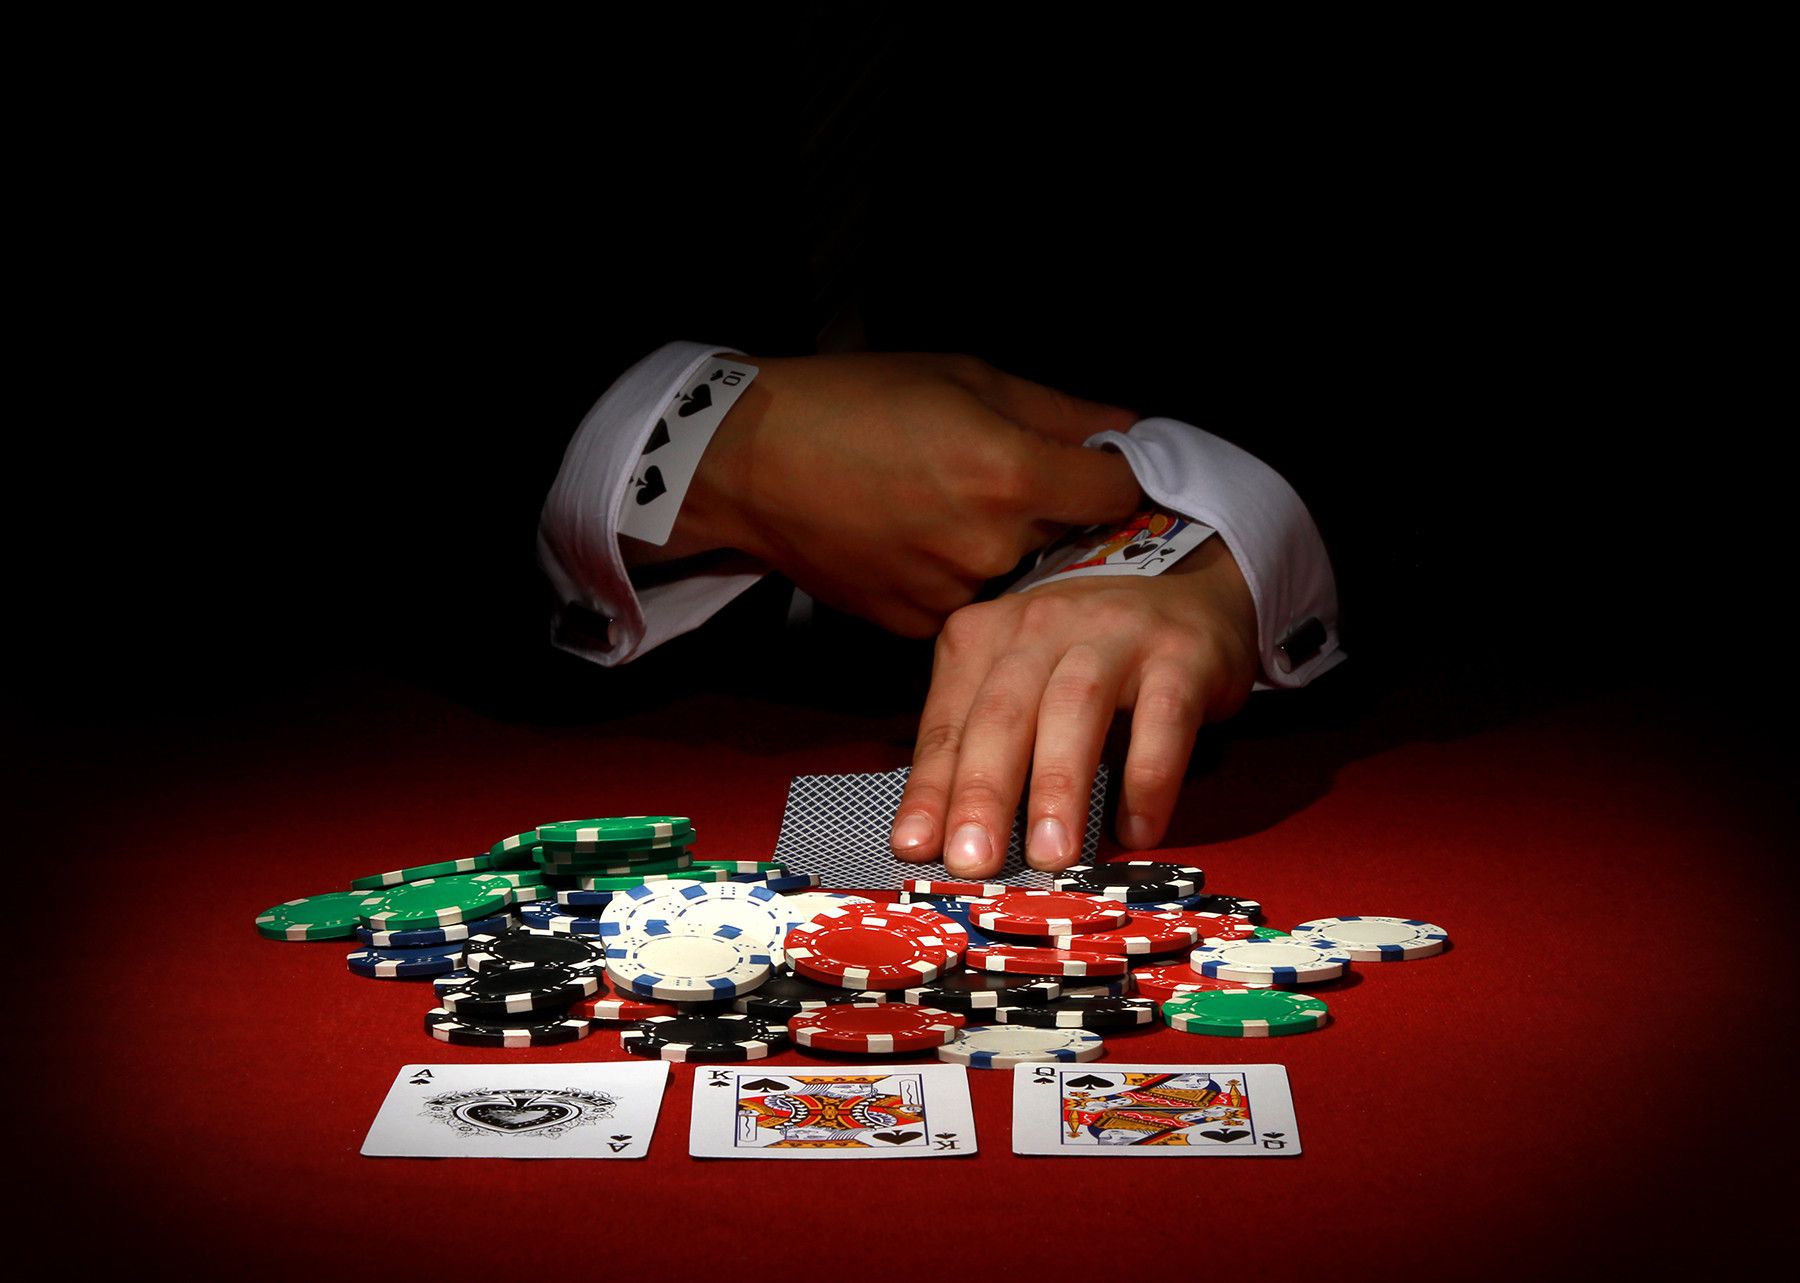 The dark side of online poker or the commoditization and weaponization of big data and espionage